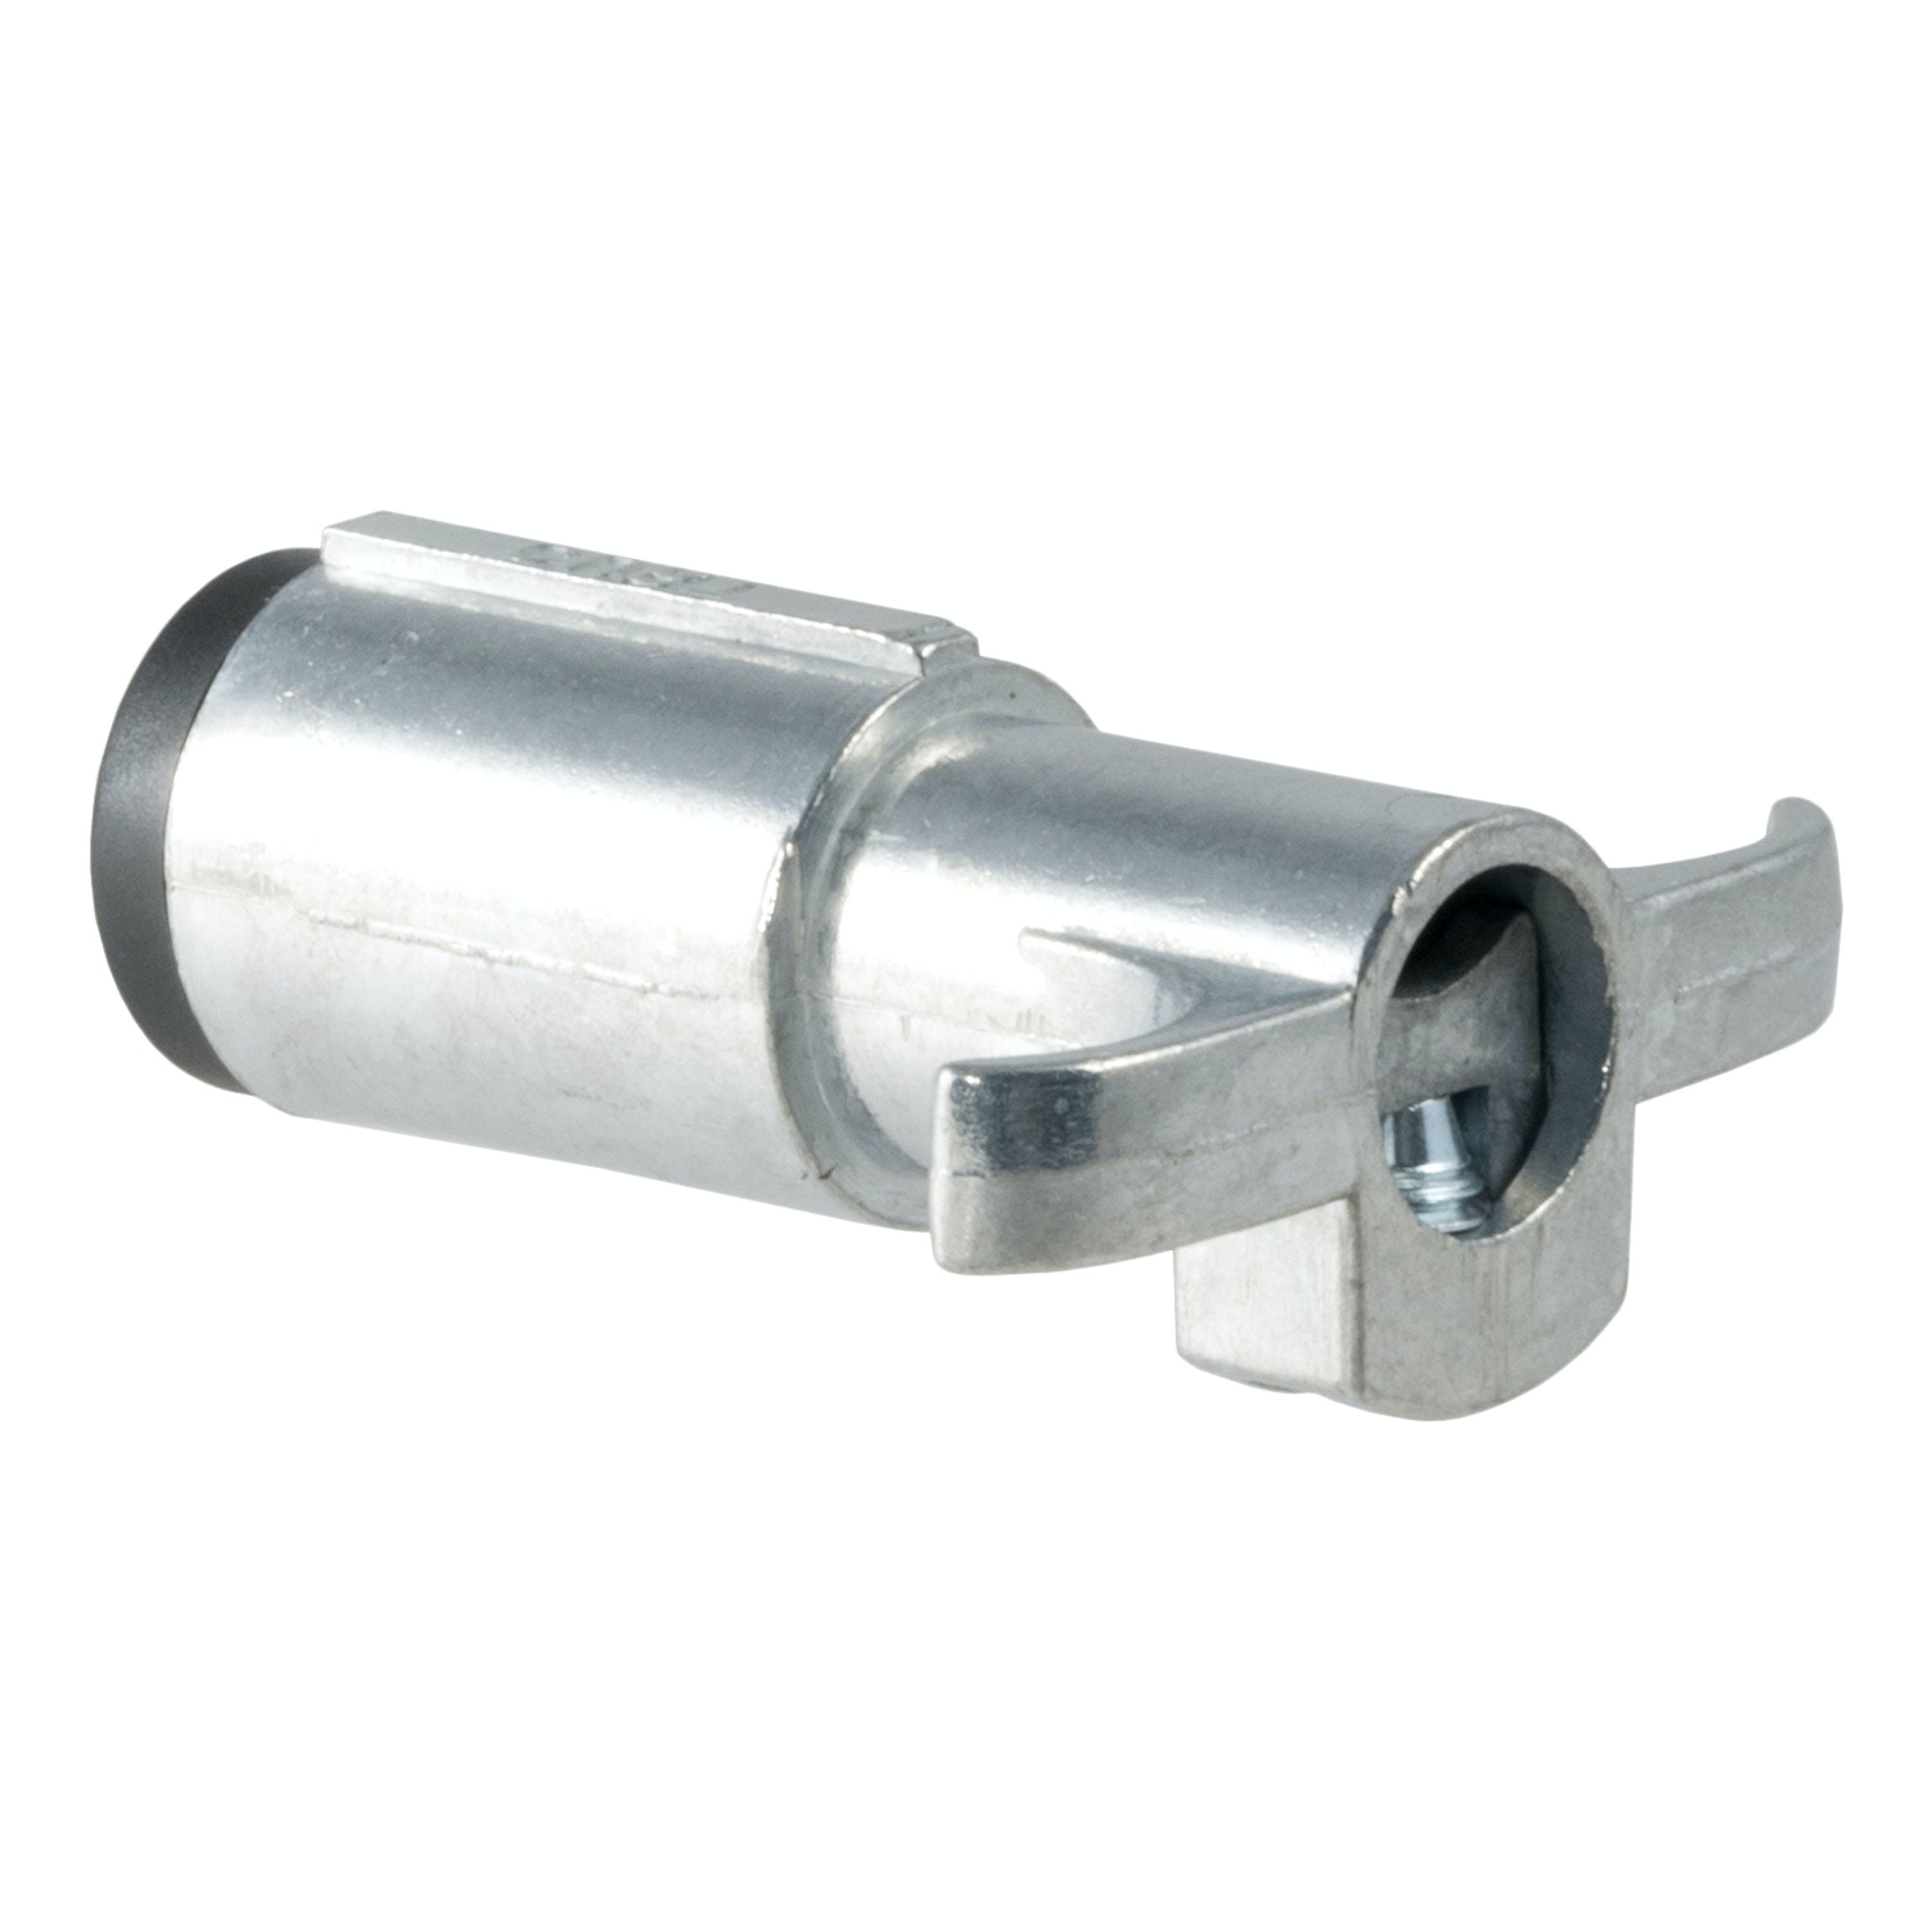 CURT 58061 4-Way Round Connector Plug (Trailer Side, Packaged)